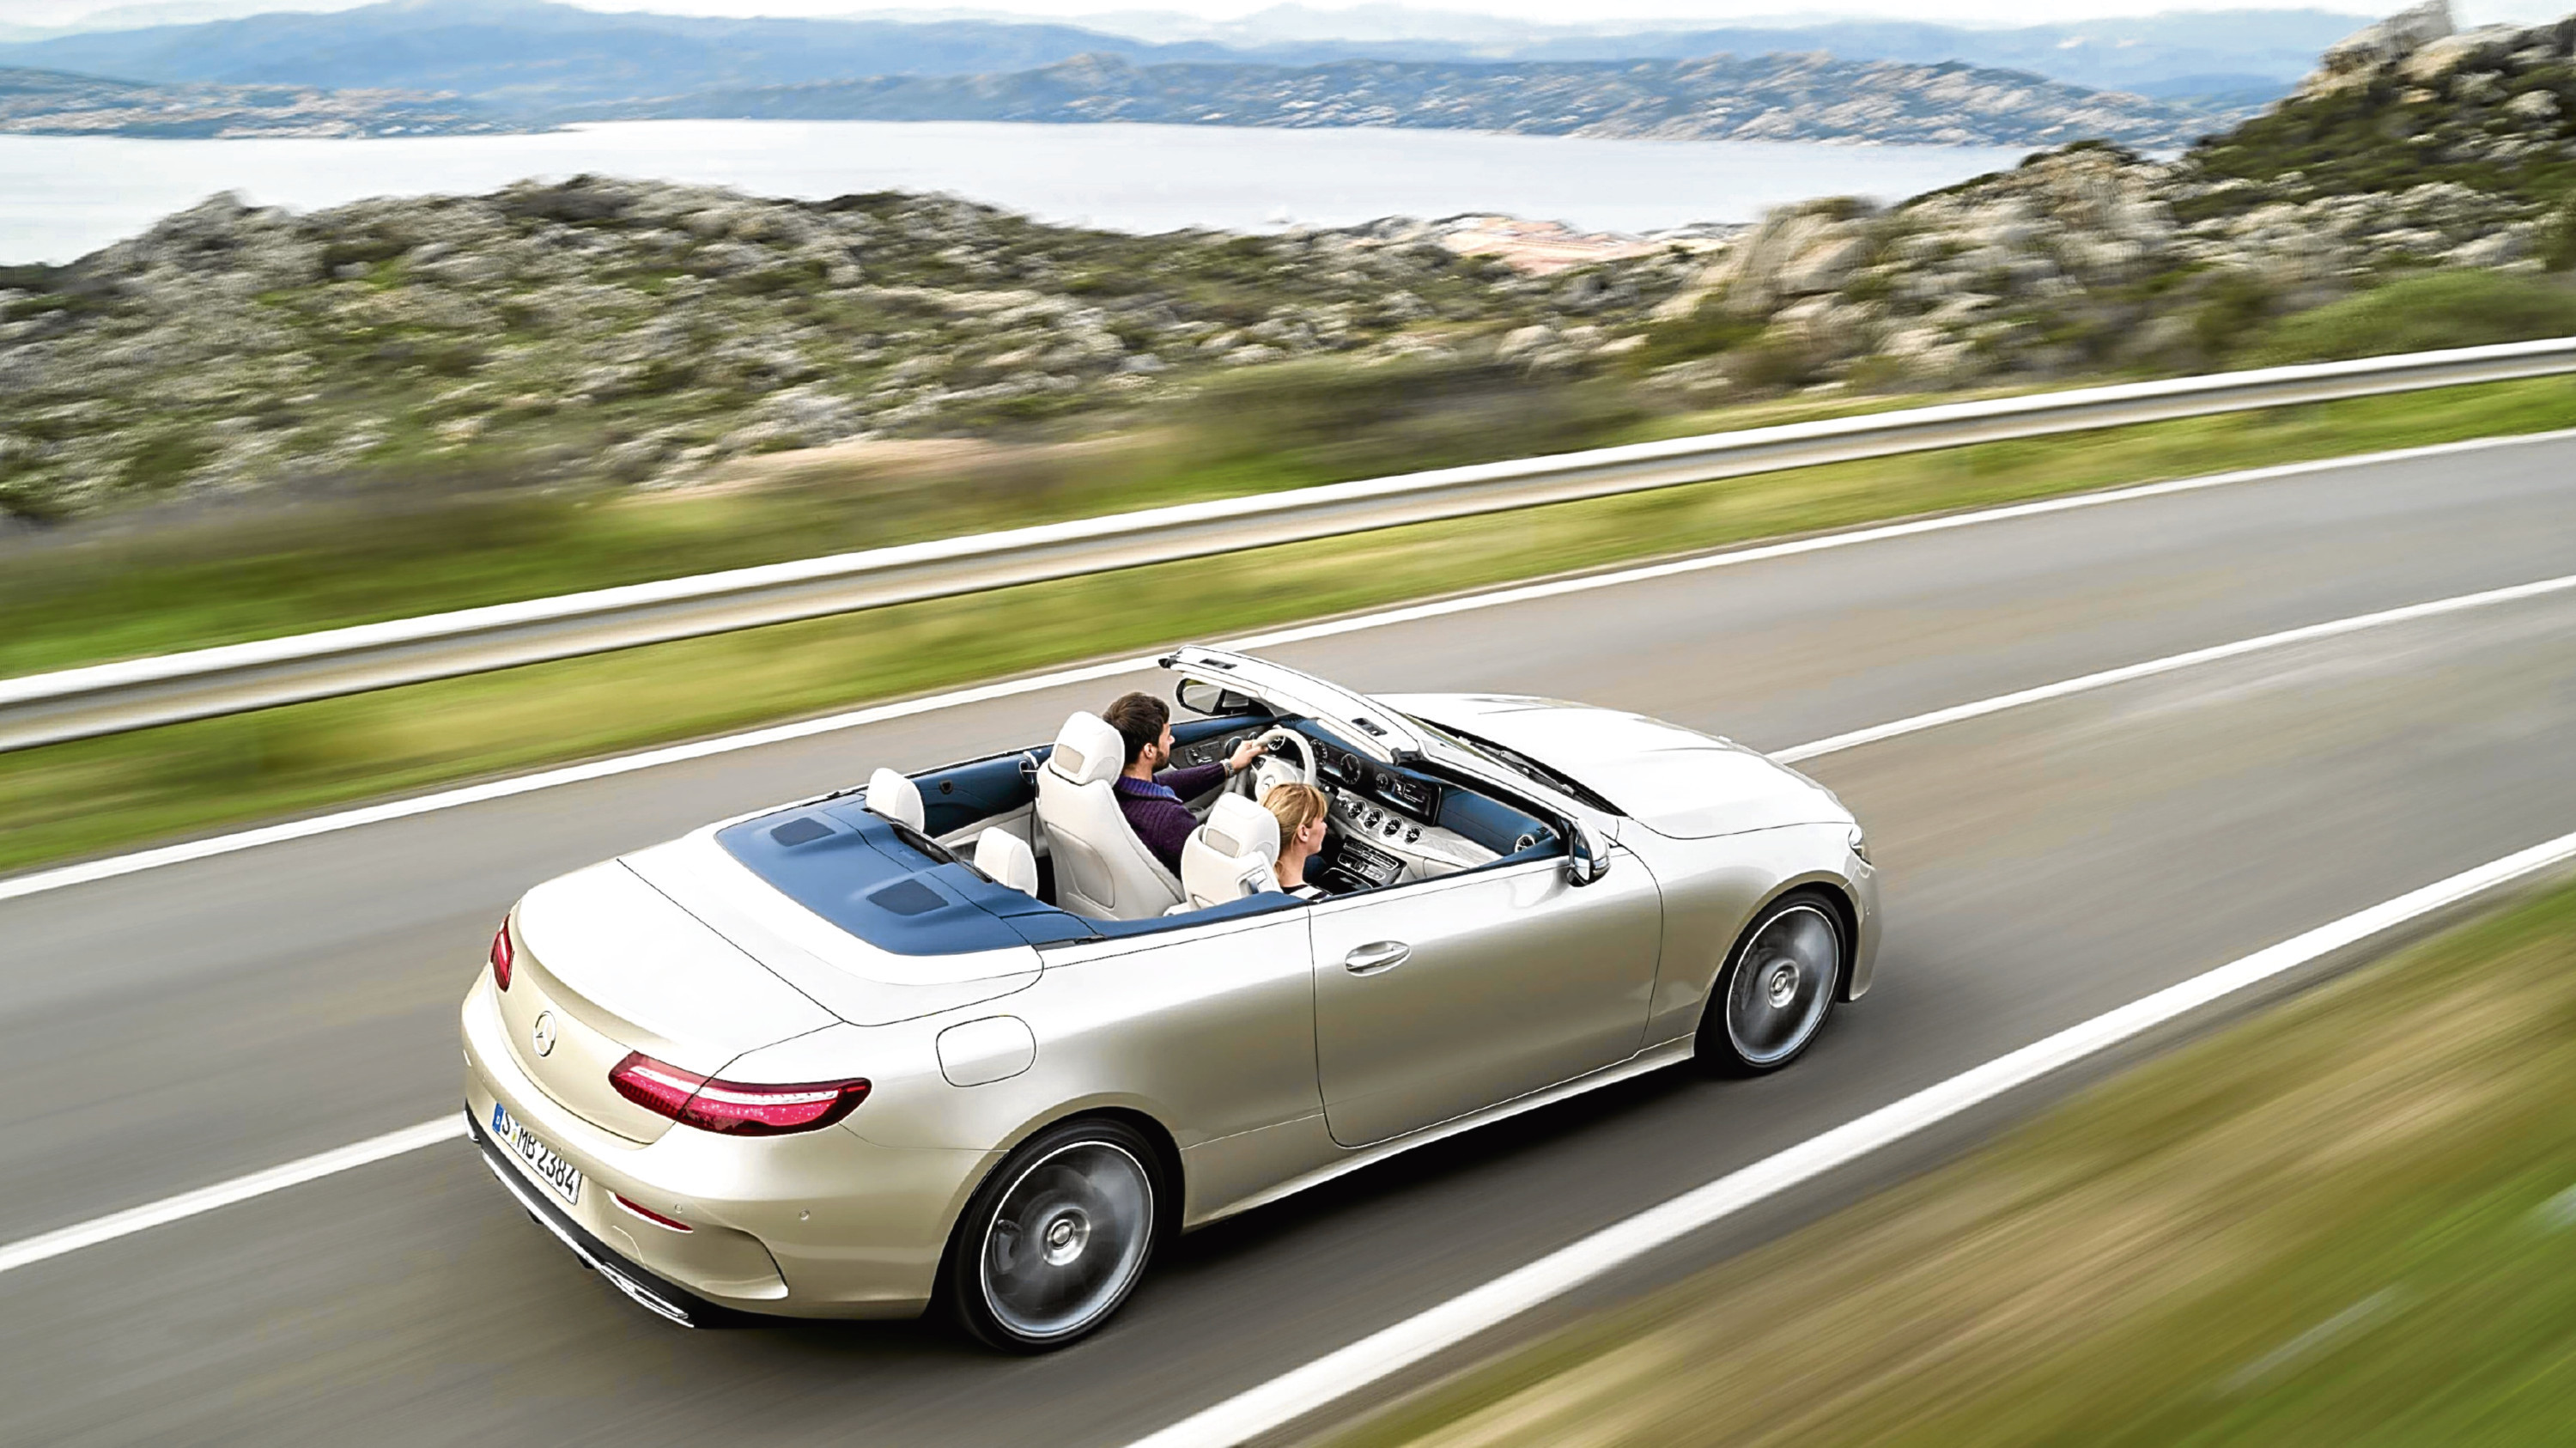 Undated Handout Photo. The Mercedes E-Class line-up is bolstered with All-Terrain and Cabriolet models. See PA Feature MOTORING News. Picture credit should read: PA Photo/Handout. WARNING: This picture must only be used to accompany PA Feature MOTORING News.